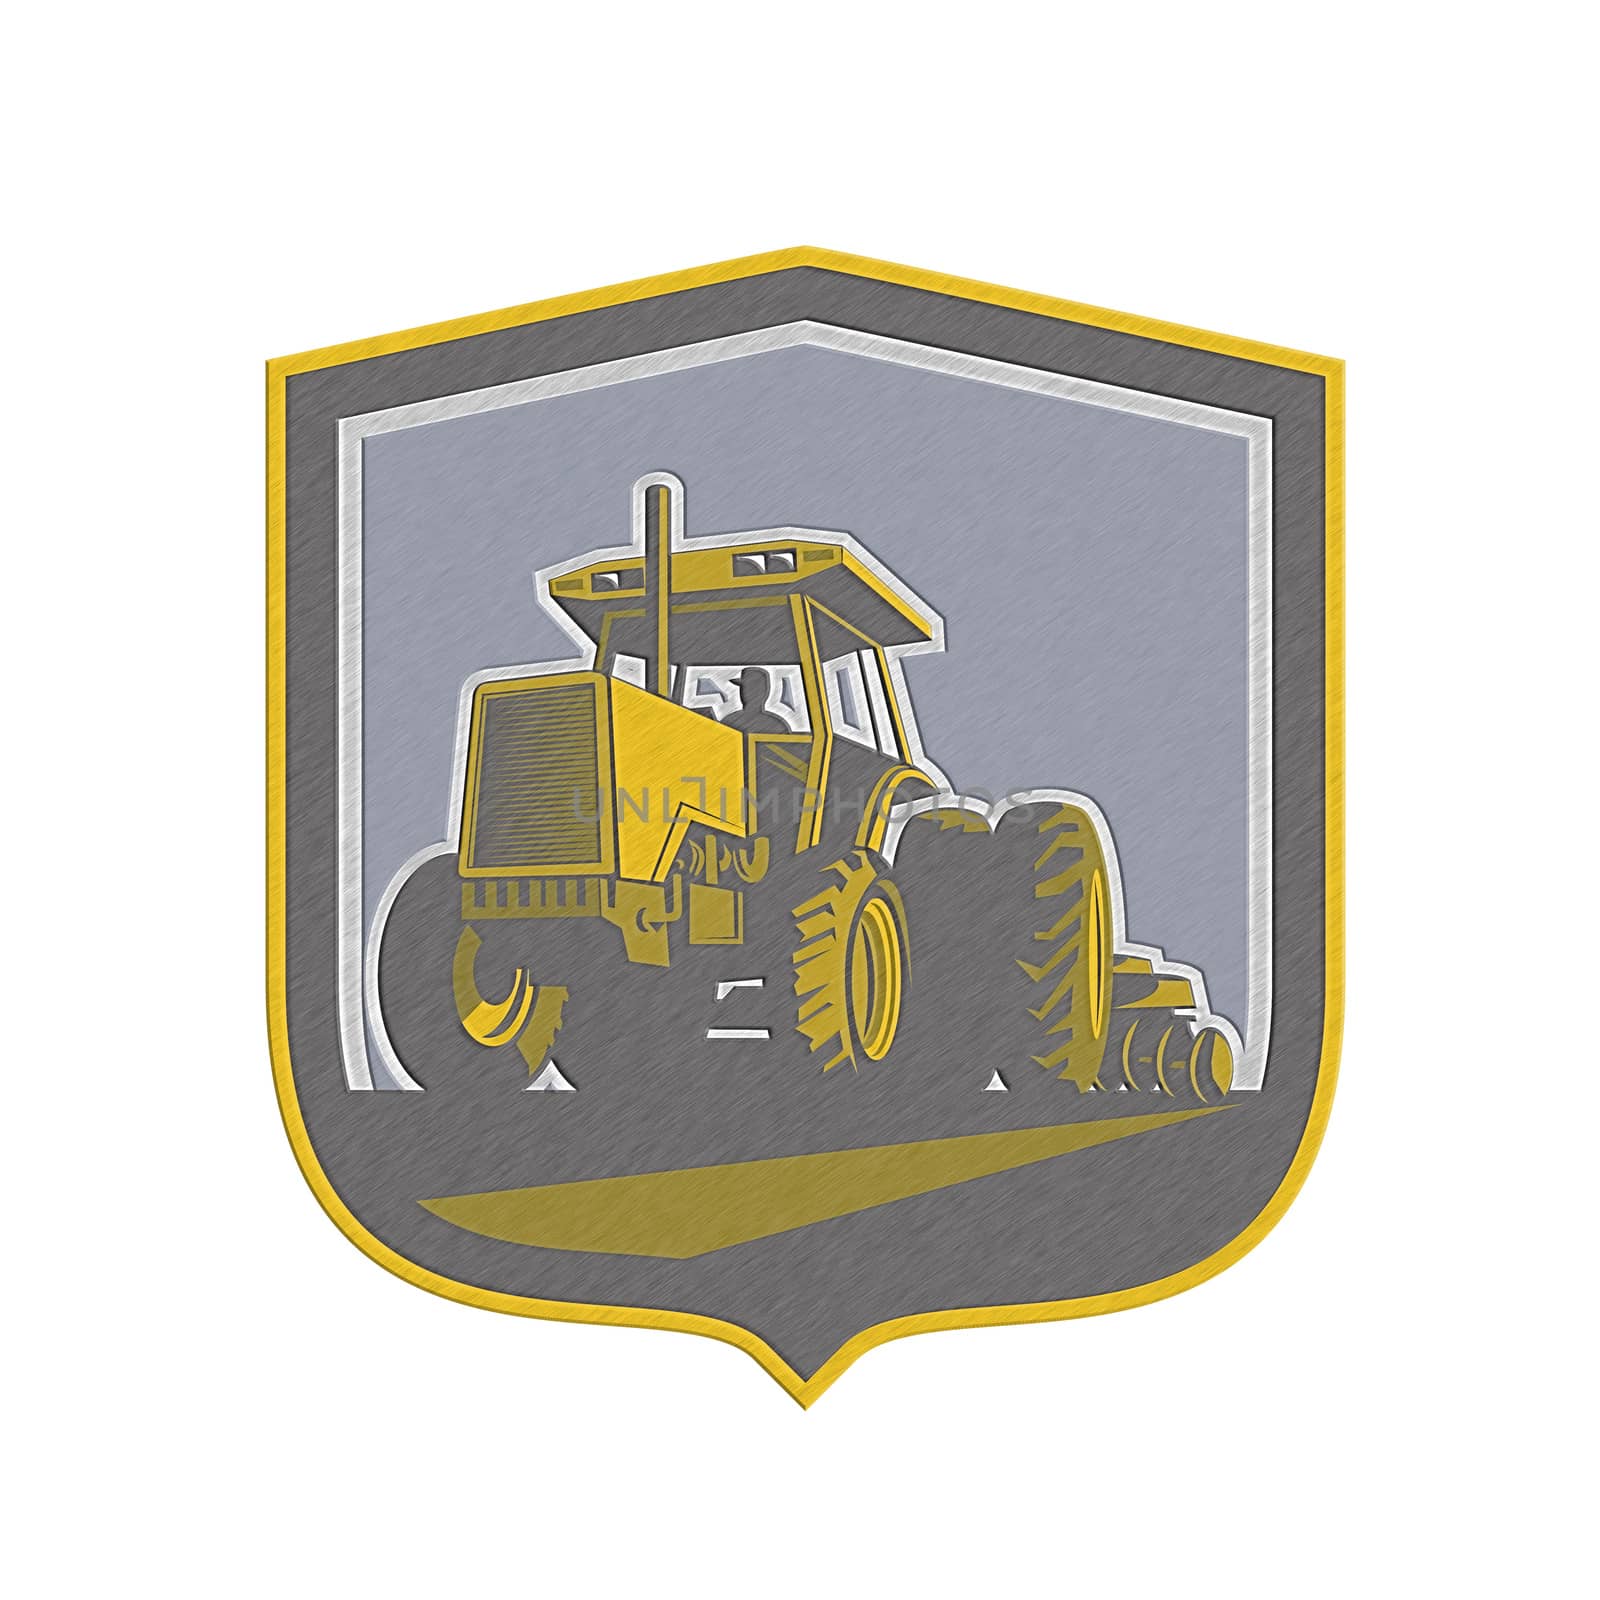 Metallic styled illustration of a farmer driving riding vintage tractor plowing field front view set inside a shield crest done in retro style.